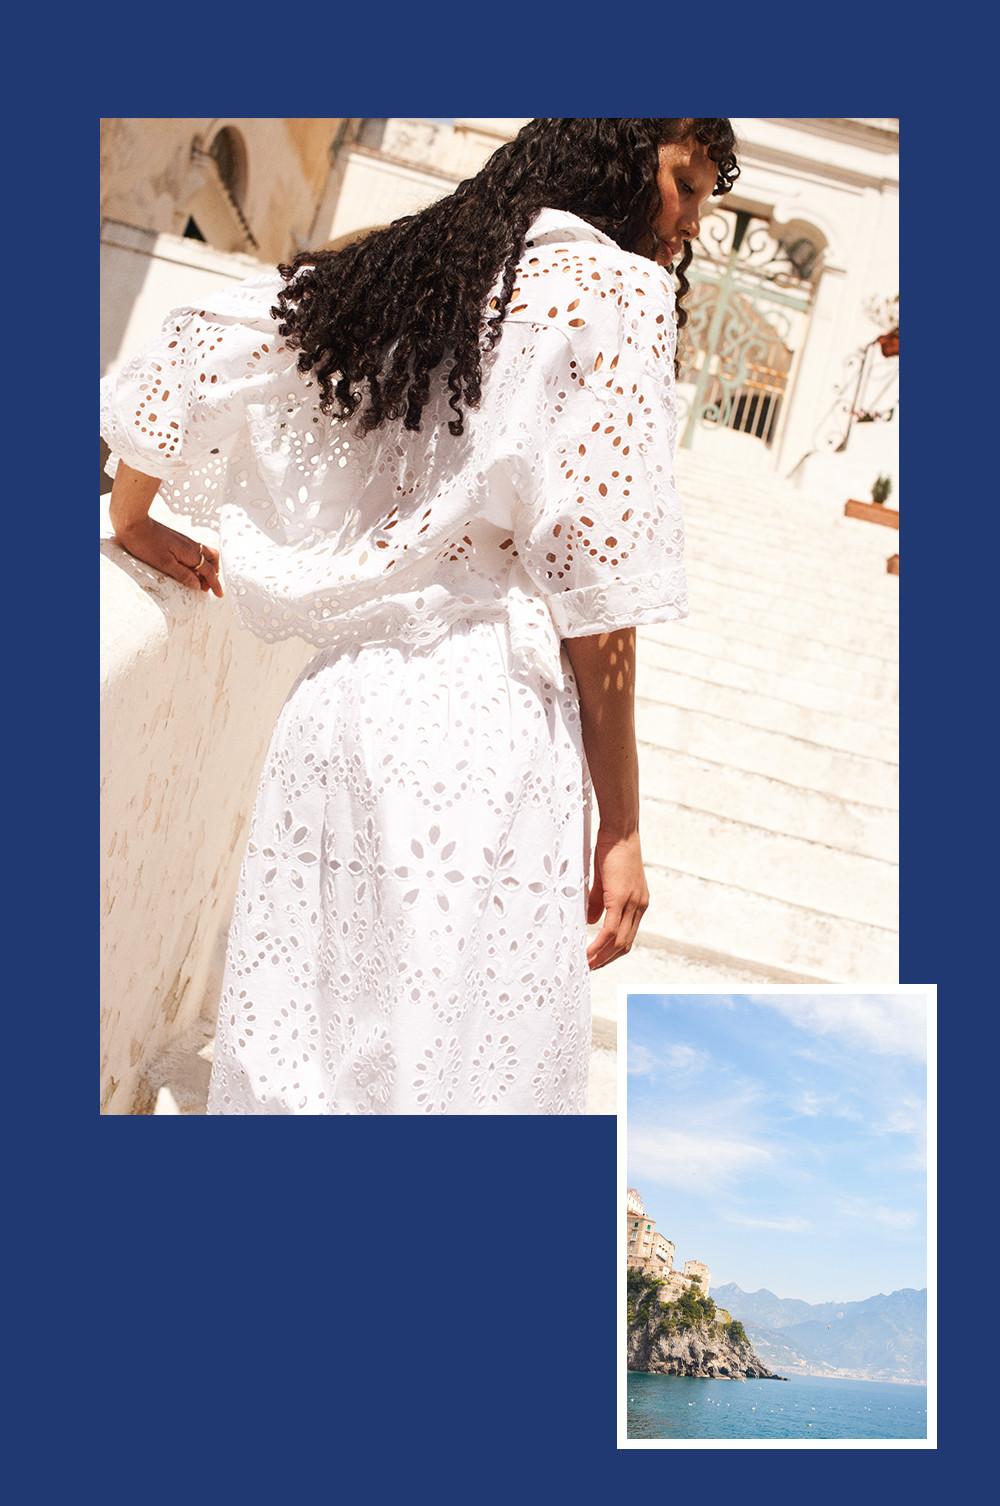 Collage of woman in white eyelet top, shirt and skirt, image of beach view